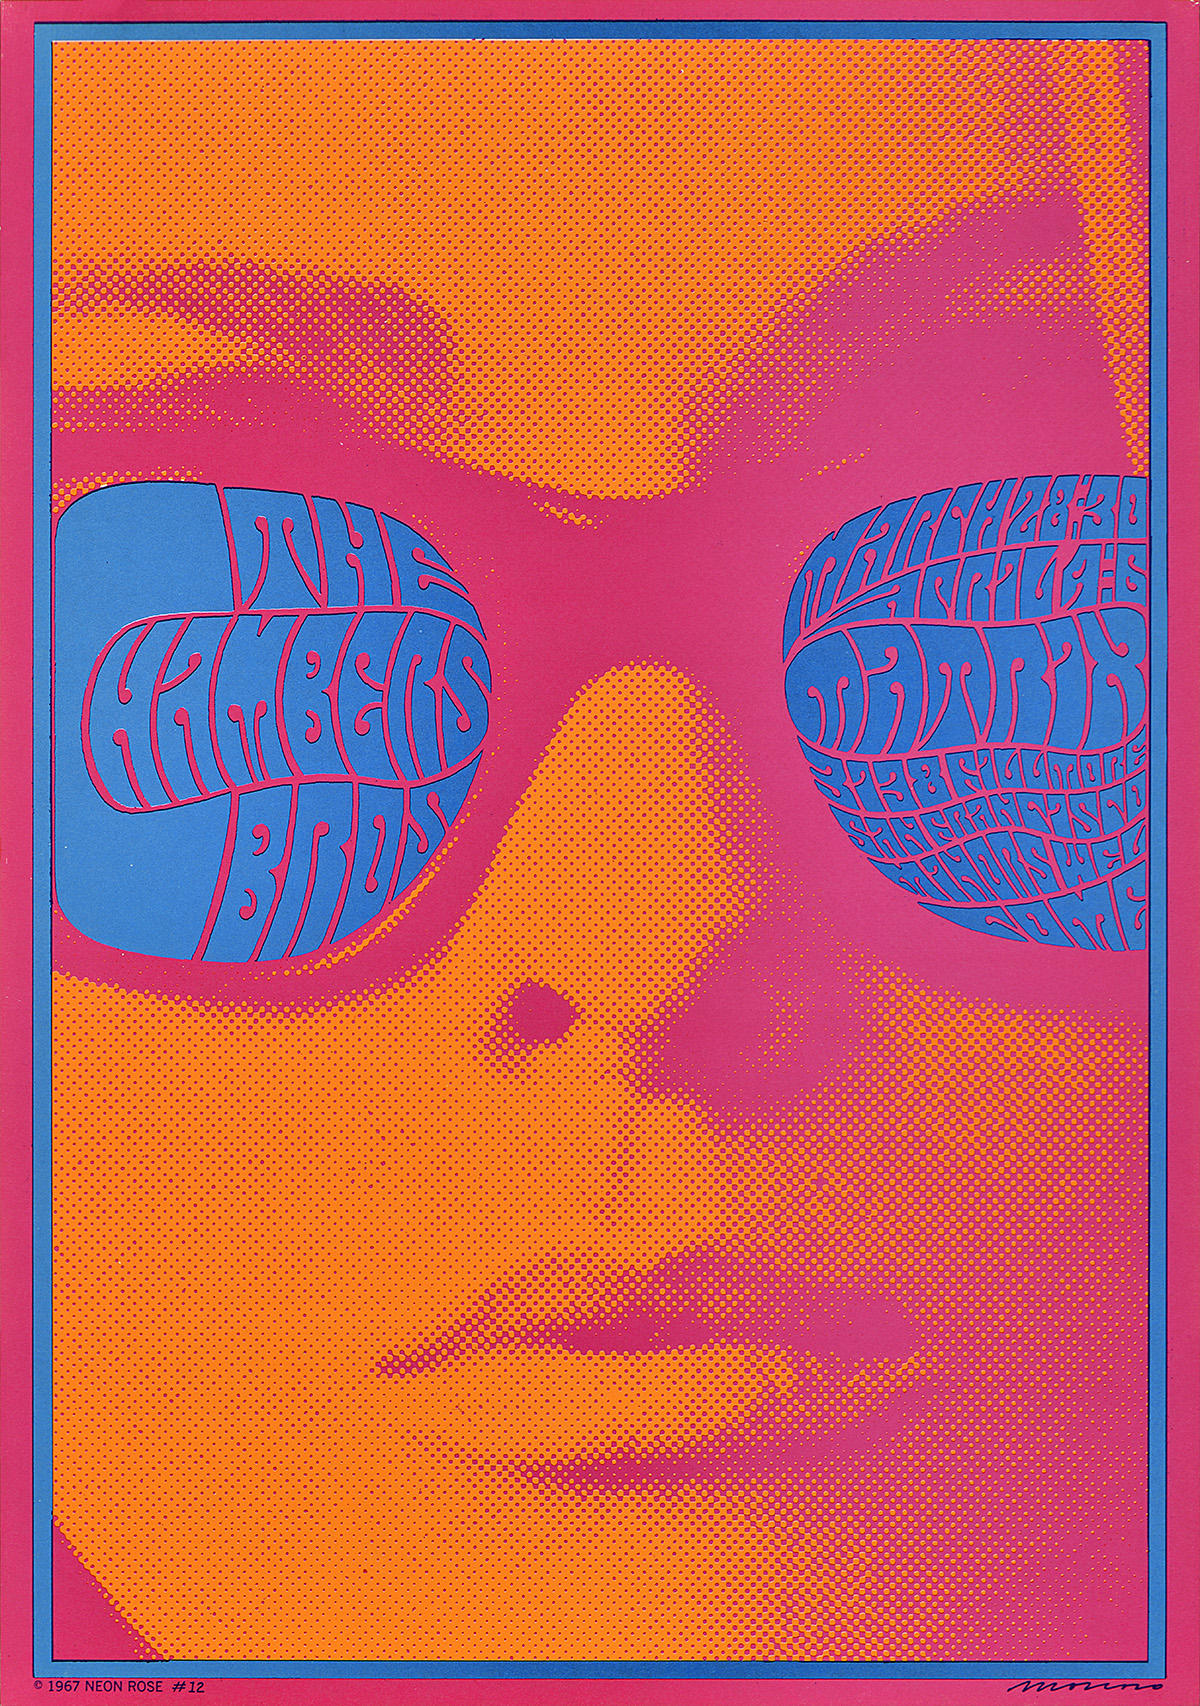 Photo-offset poster of a figure wearing sunglasses filled with text.